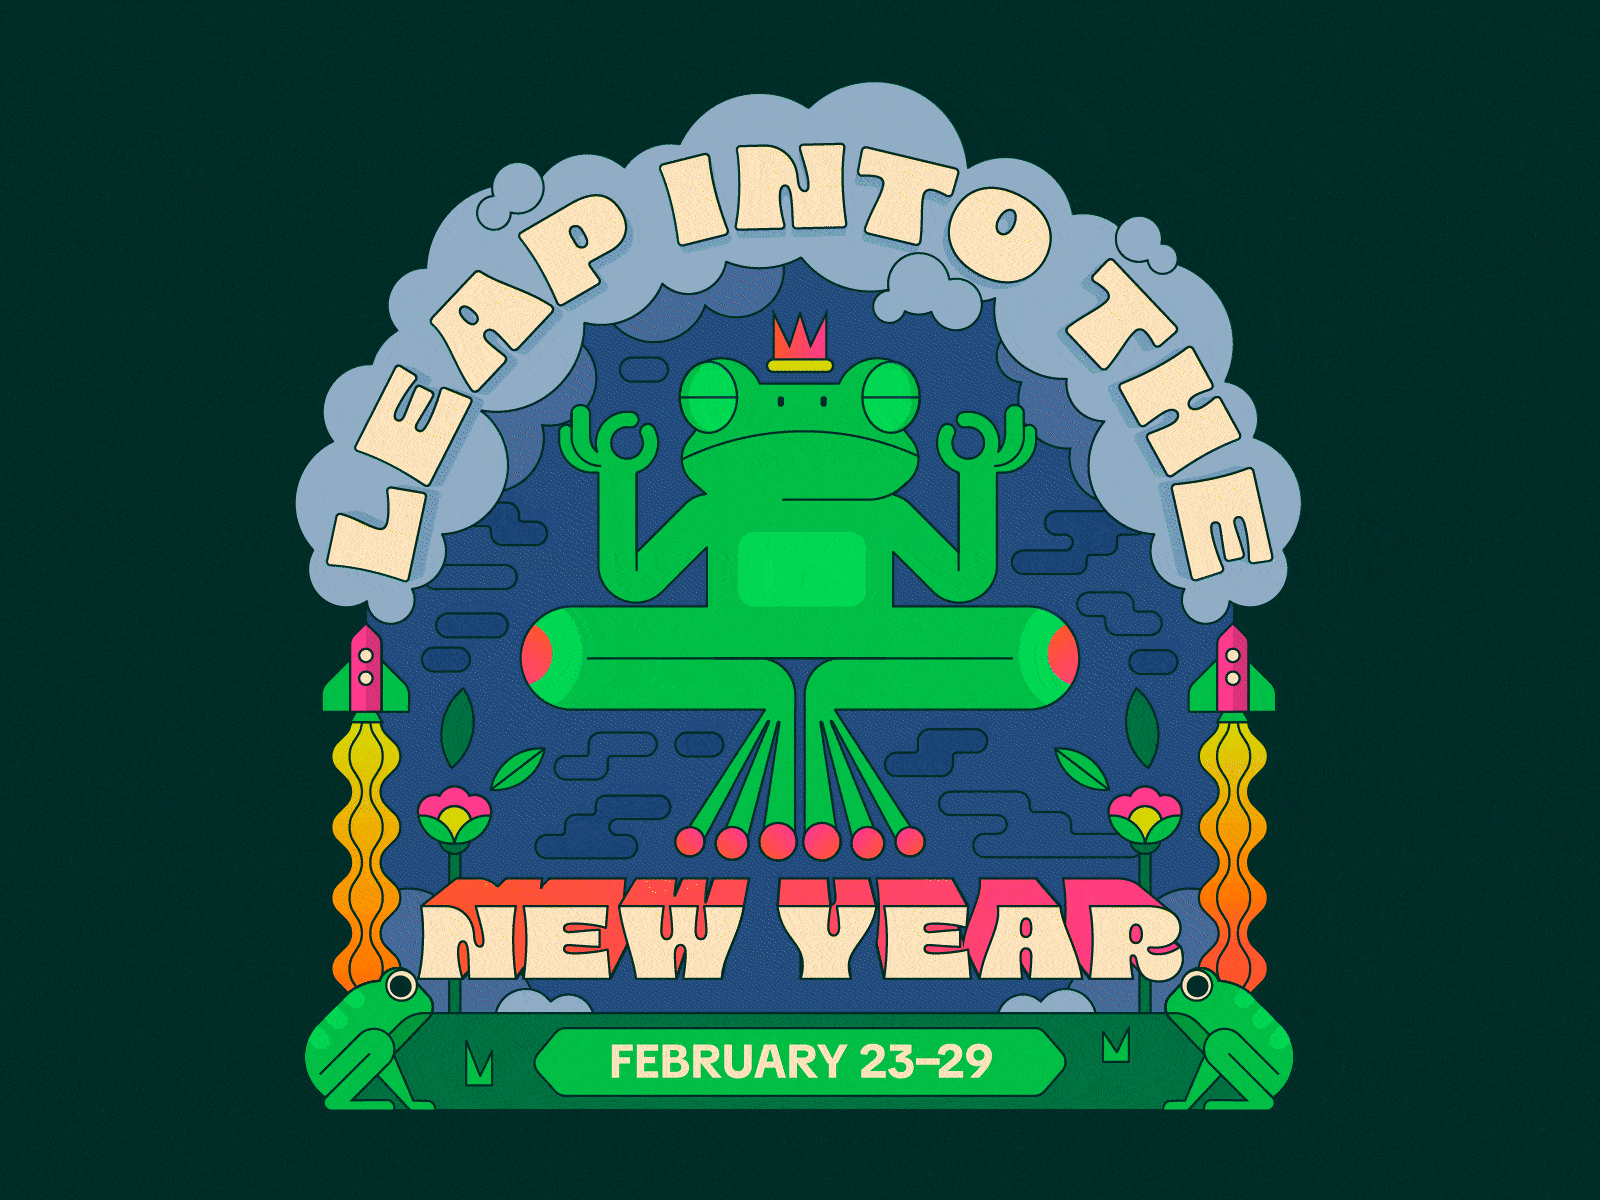 Leap into the New year at TikTok! flowers frog frogs funky green illustration jump leap year new year rocket ship typography vector